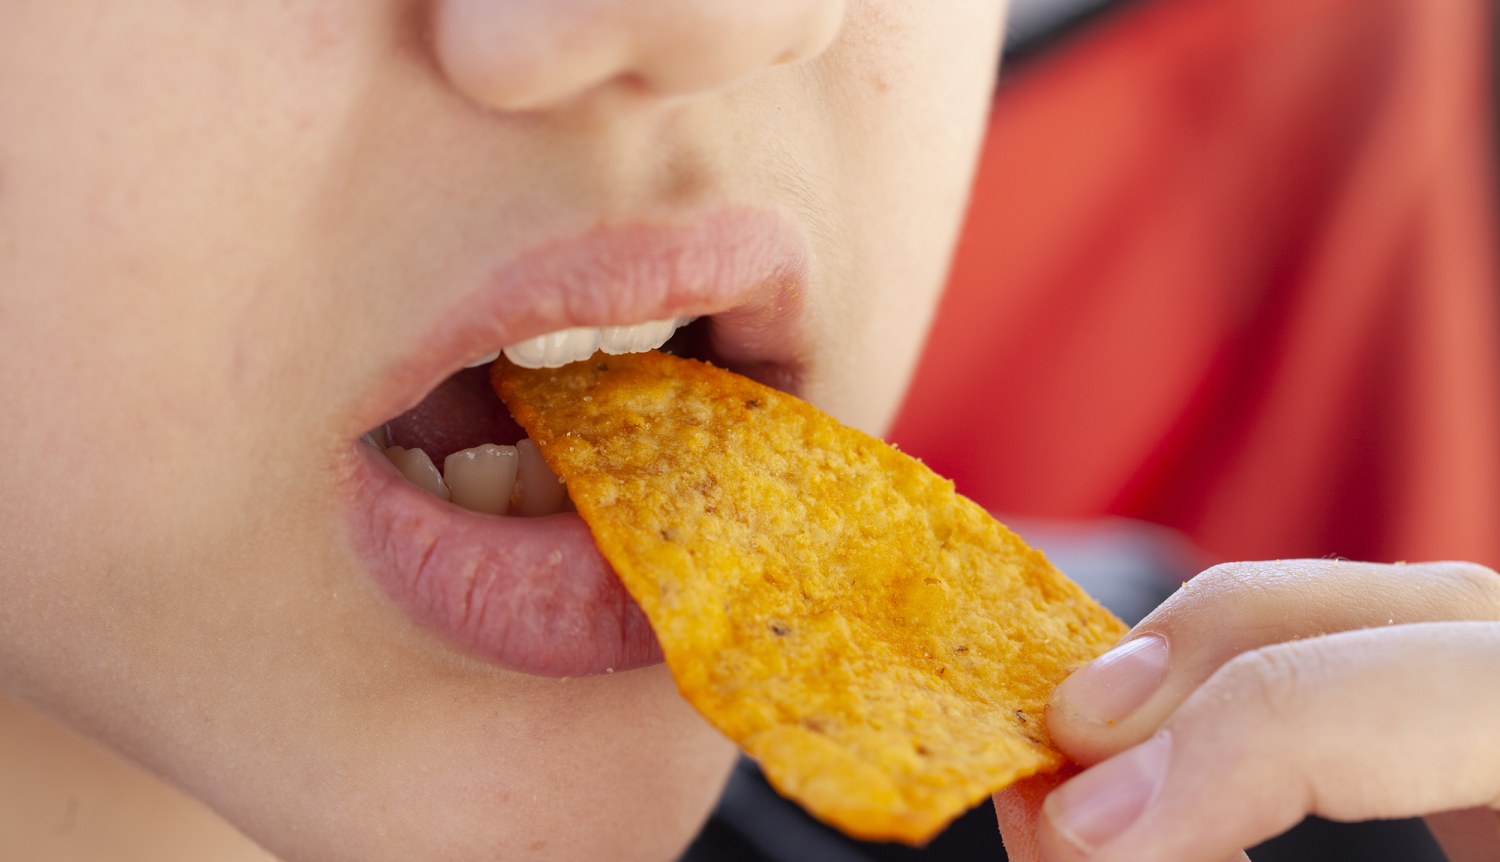 The Hot-Chip Challenge Schools Are Banning Left And Right